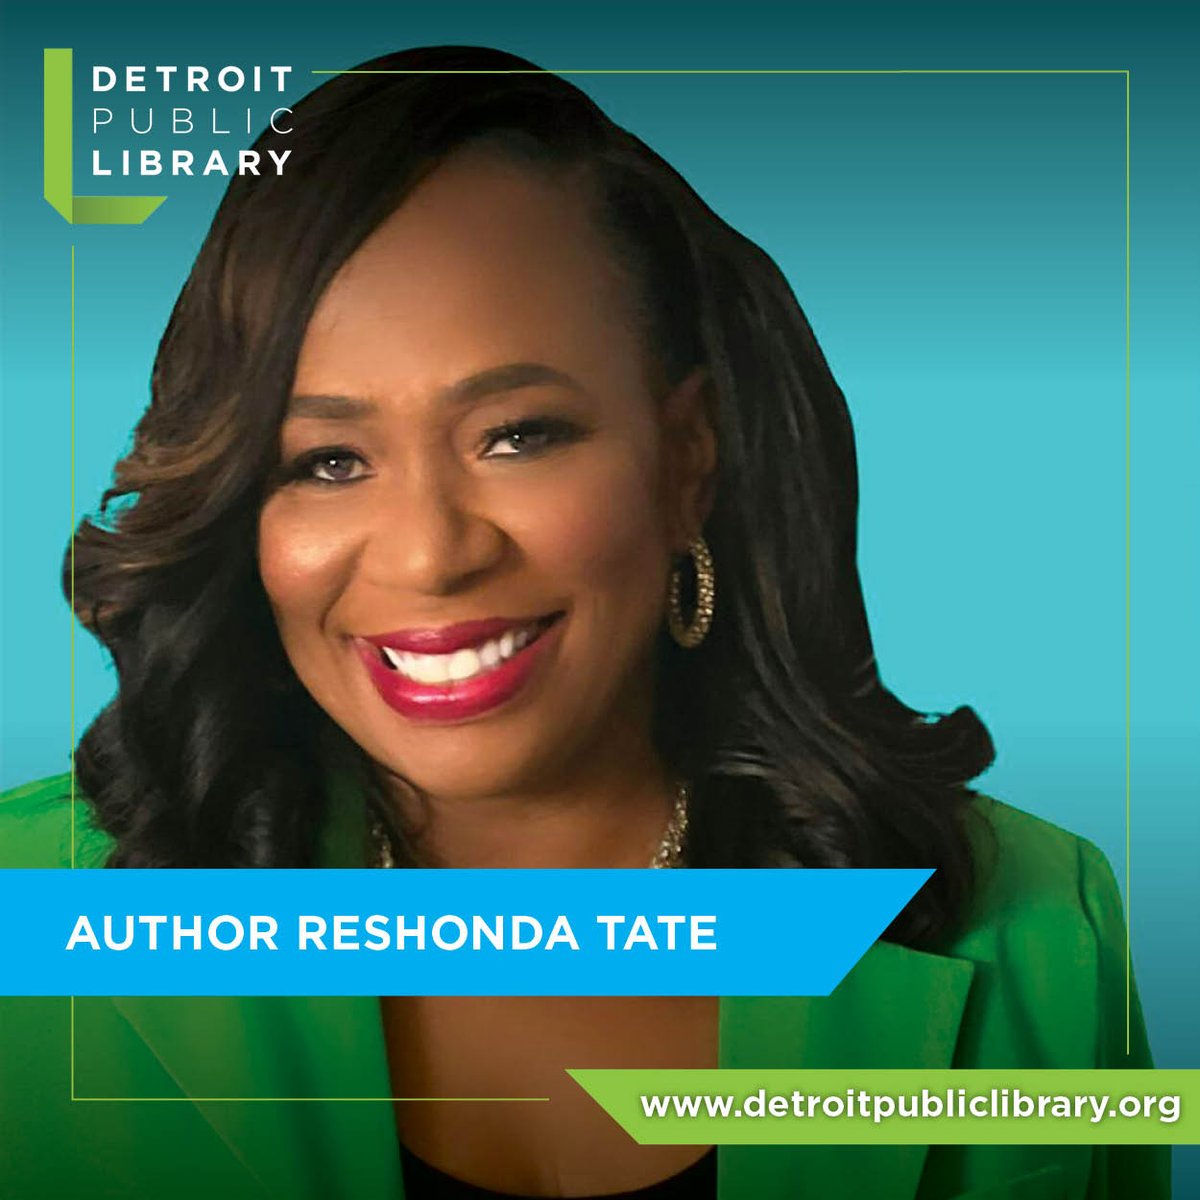 Author @ReShondaT will share her secrets of success and how you can bring out the writer in you at the #detroitpubliclibrary on Sun, April 7 at 2 pm. Her latest novel, 'The Queen of Sugar Hill' is a fictional portrait of actress Hattie McDaniel. eventbrite.com/e/author-serie…